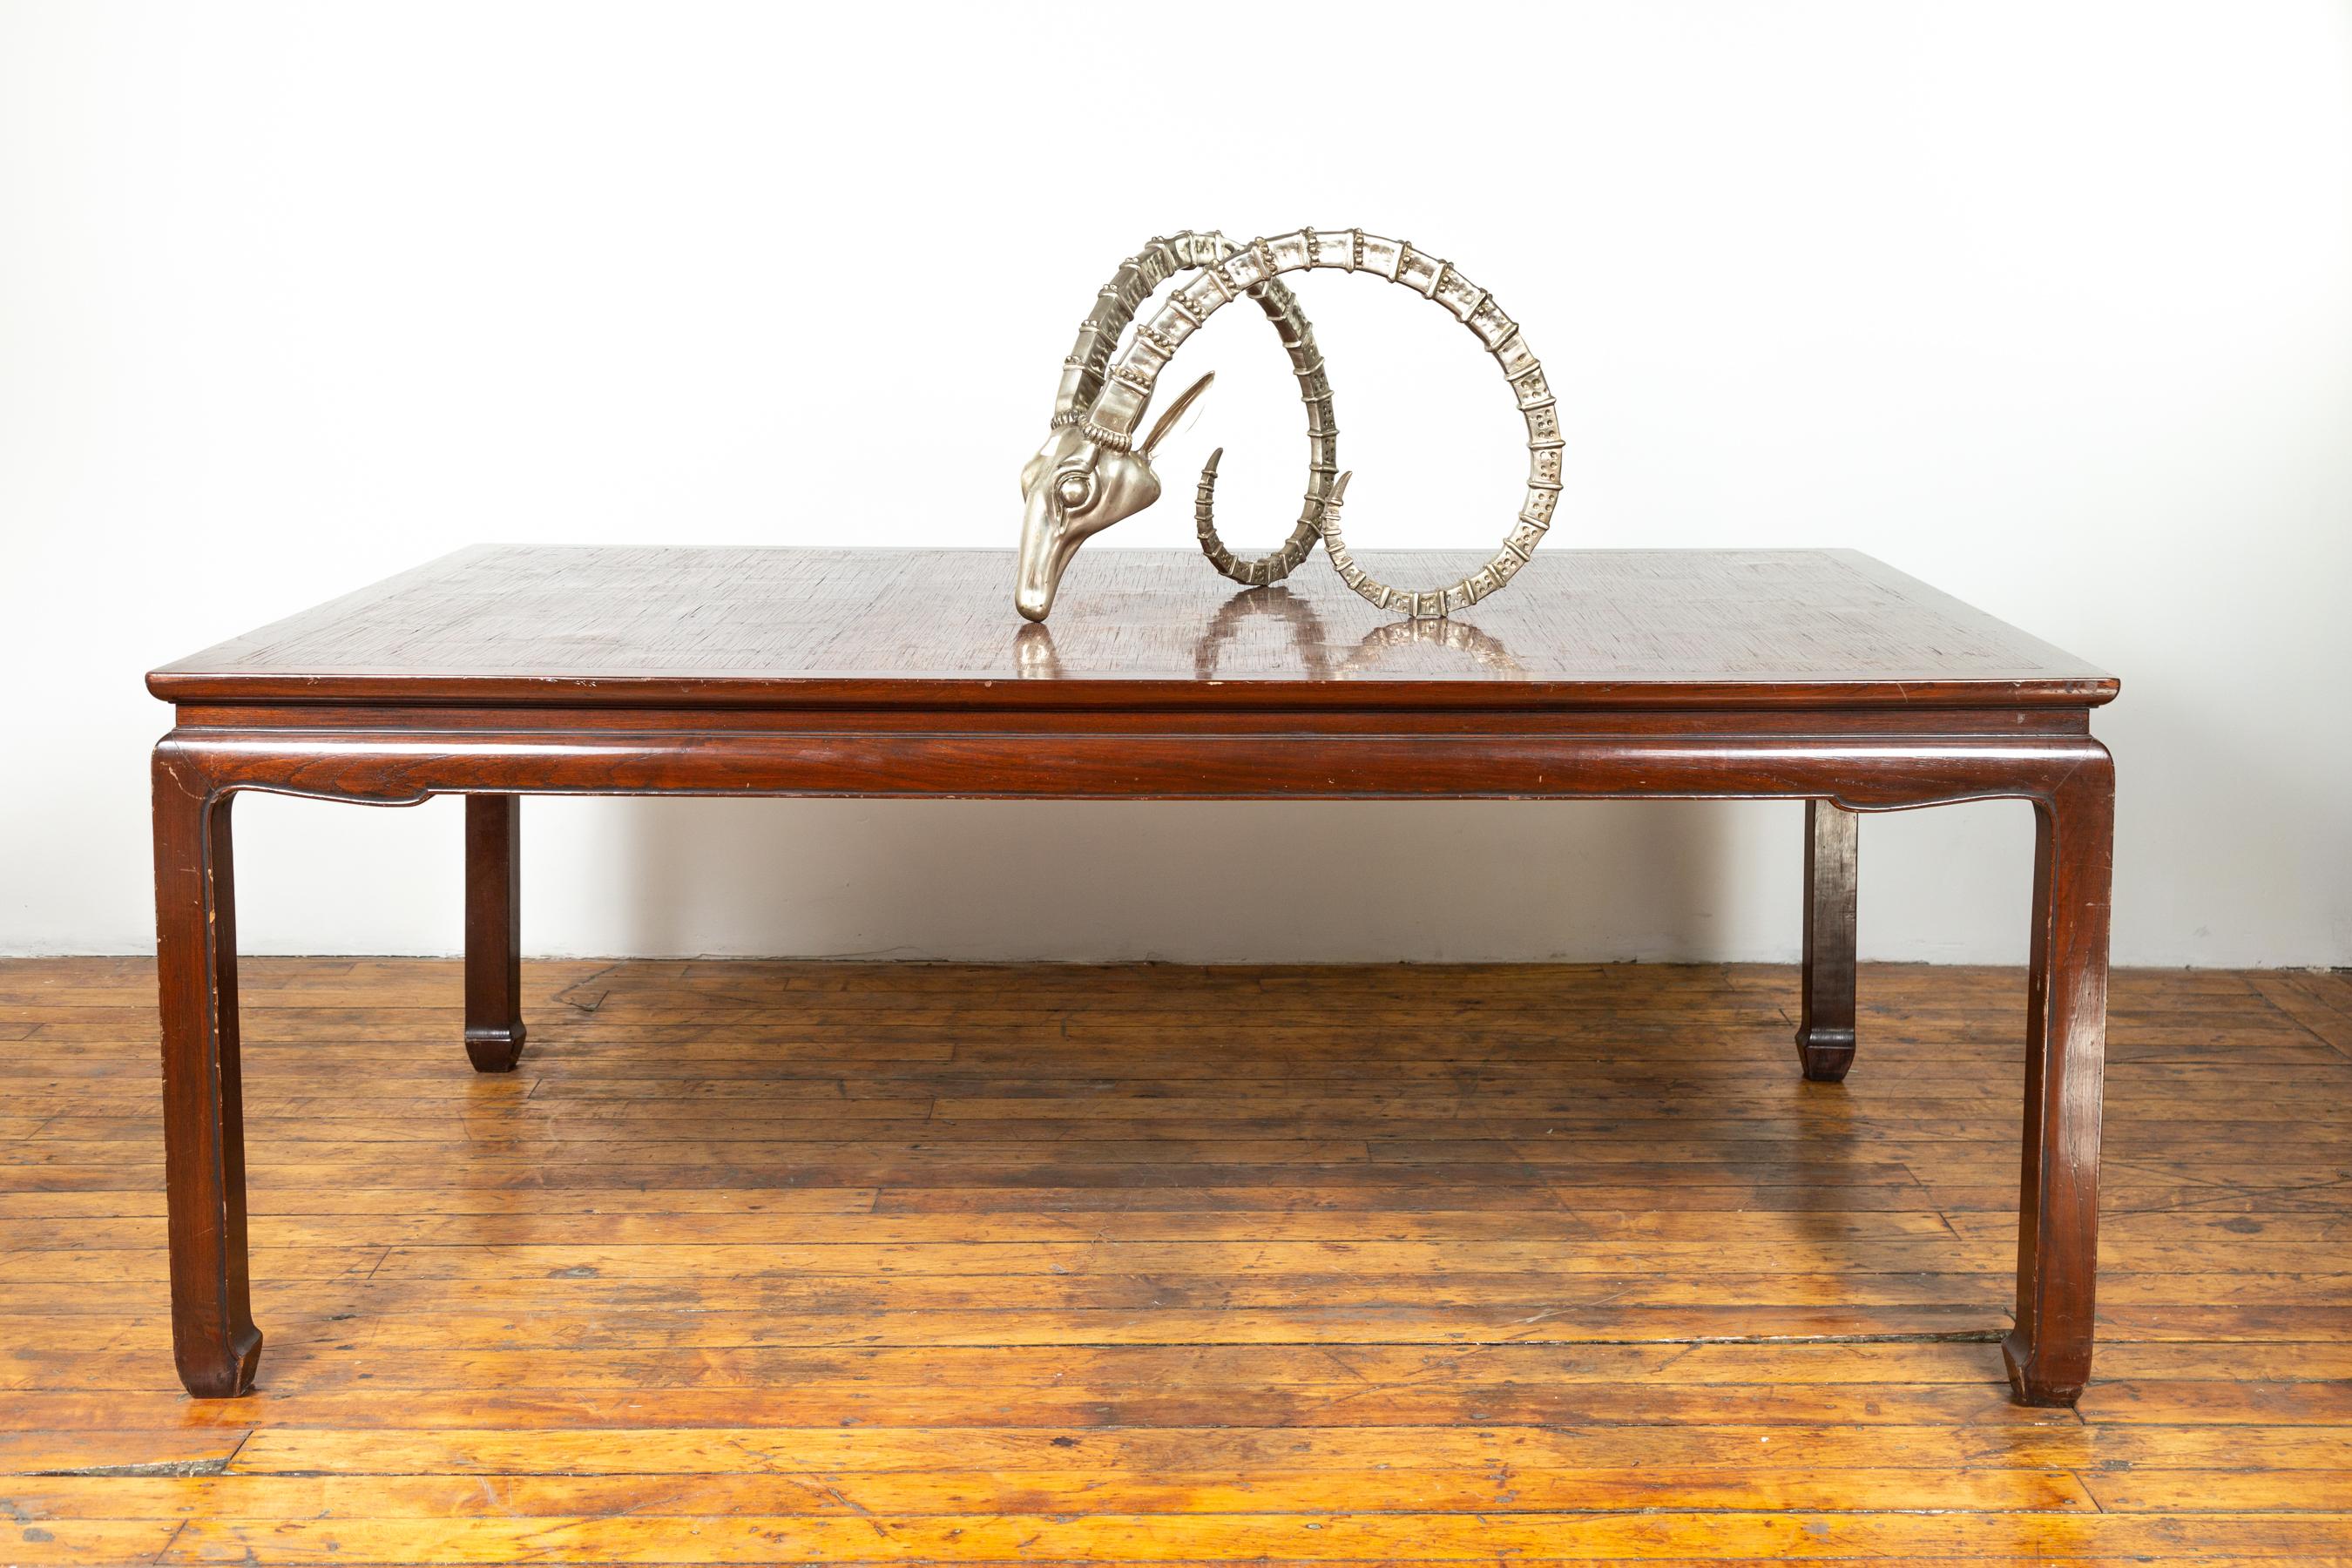 A vintage Thai dining table from the mid-20th century, with open mat top inlay and horsehoof legs. Born in Thailand during the mid-century period, this elegant dining table features a rectangular open mat inlaid waisted top sitting above an arched